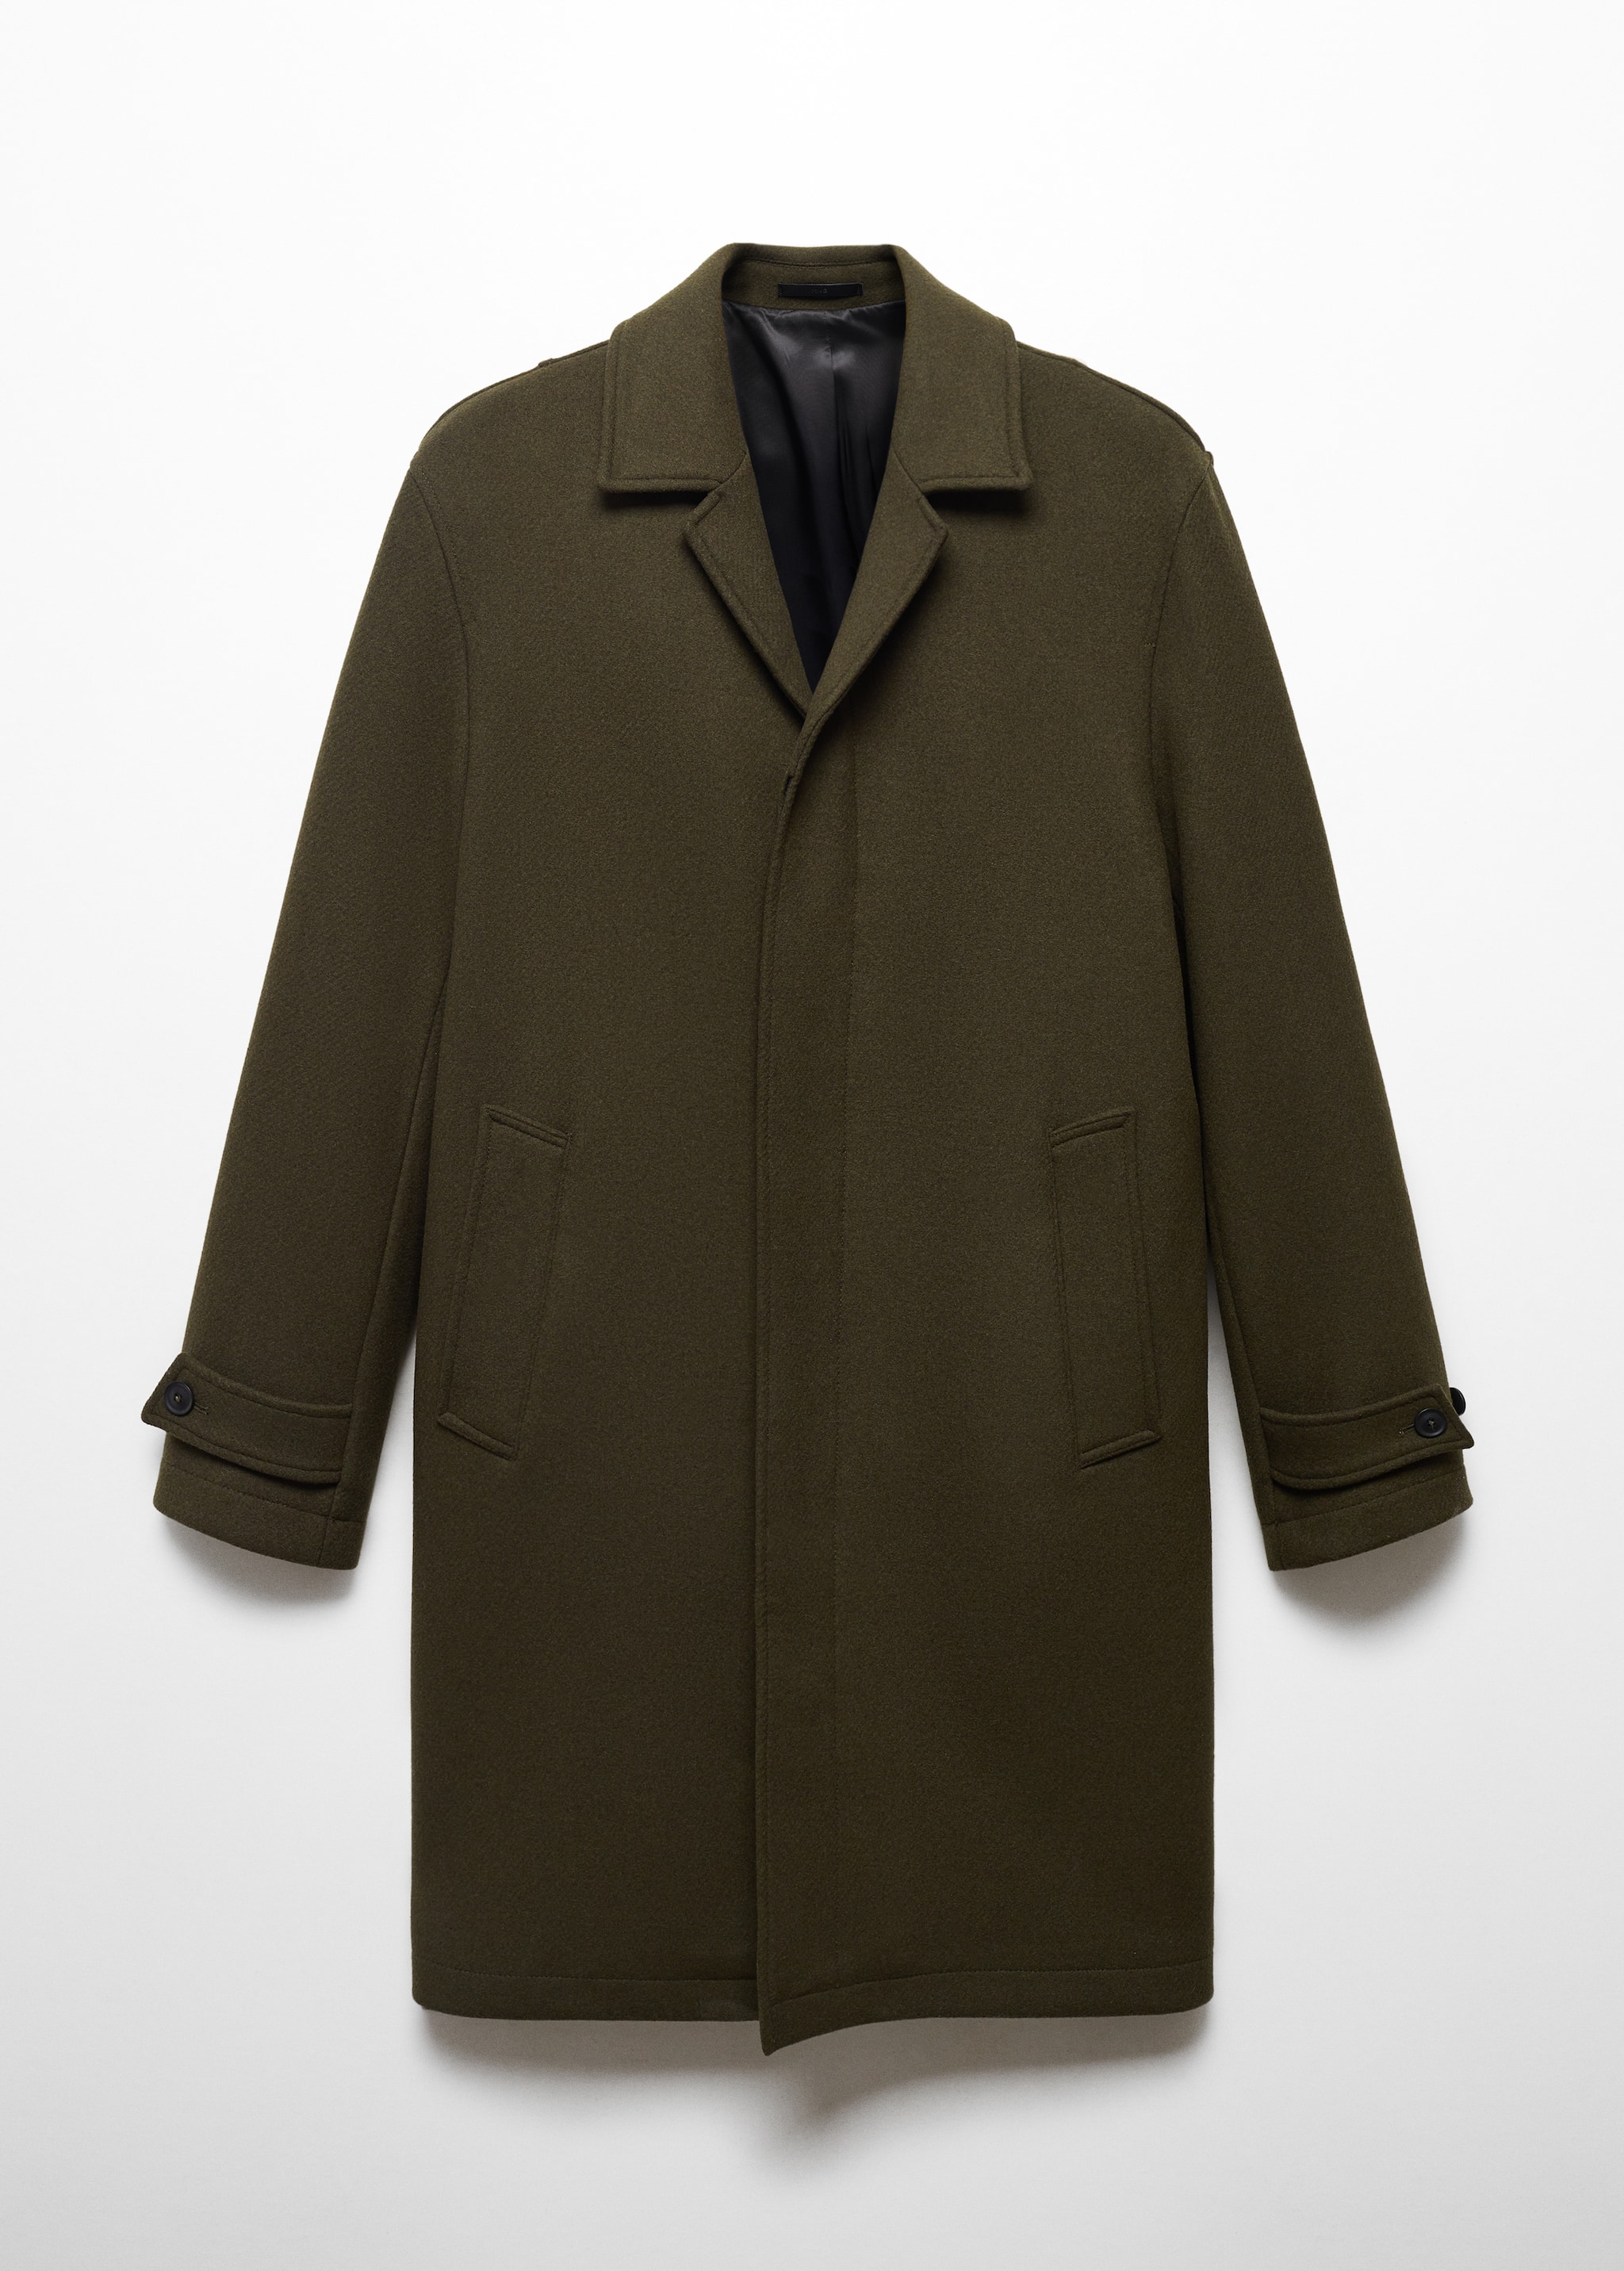  Regular fit wool coat - Article without model